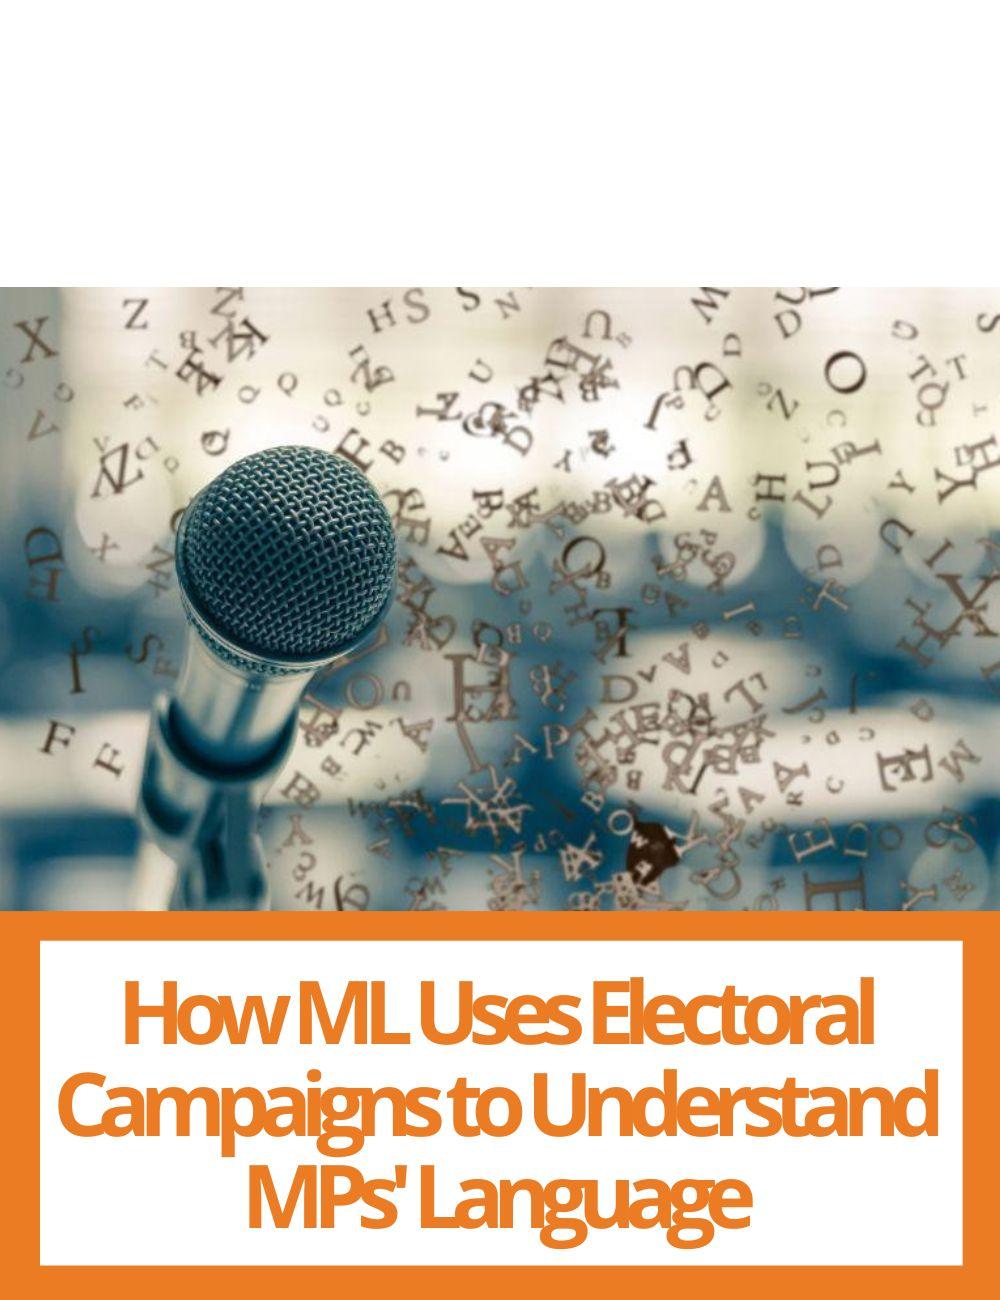 Link to related stories. Image: a microphone. Story headline: How Machine Learning Uses Electoral Campaigns to Understand MPs' Language